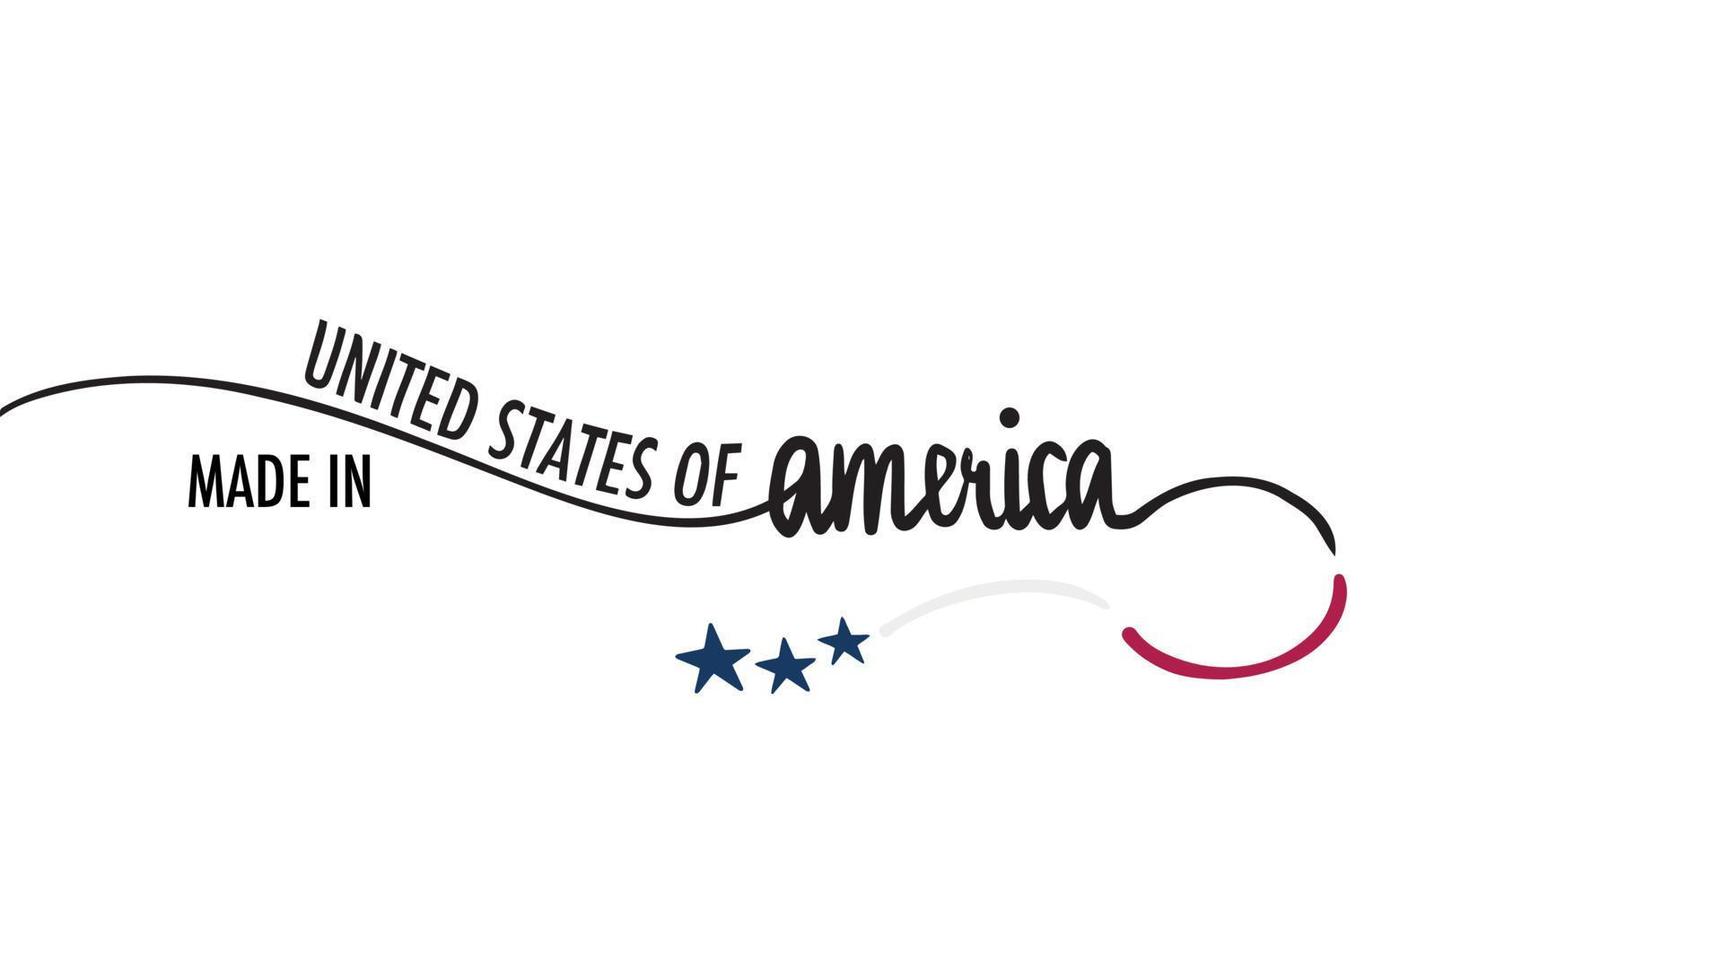 Minimalist Typography Vector Illustration of Made In United States of America